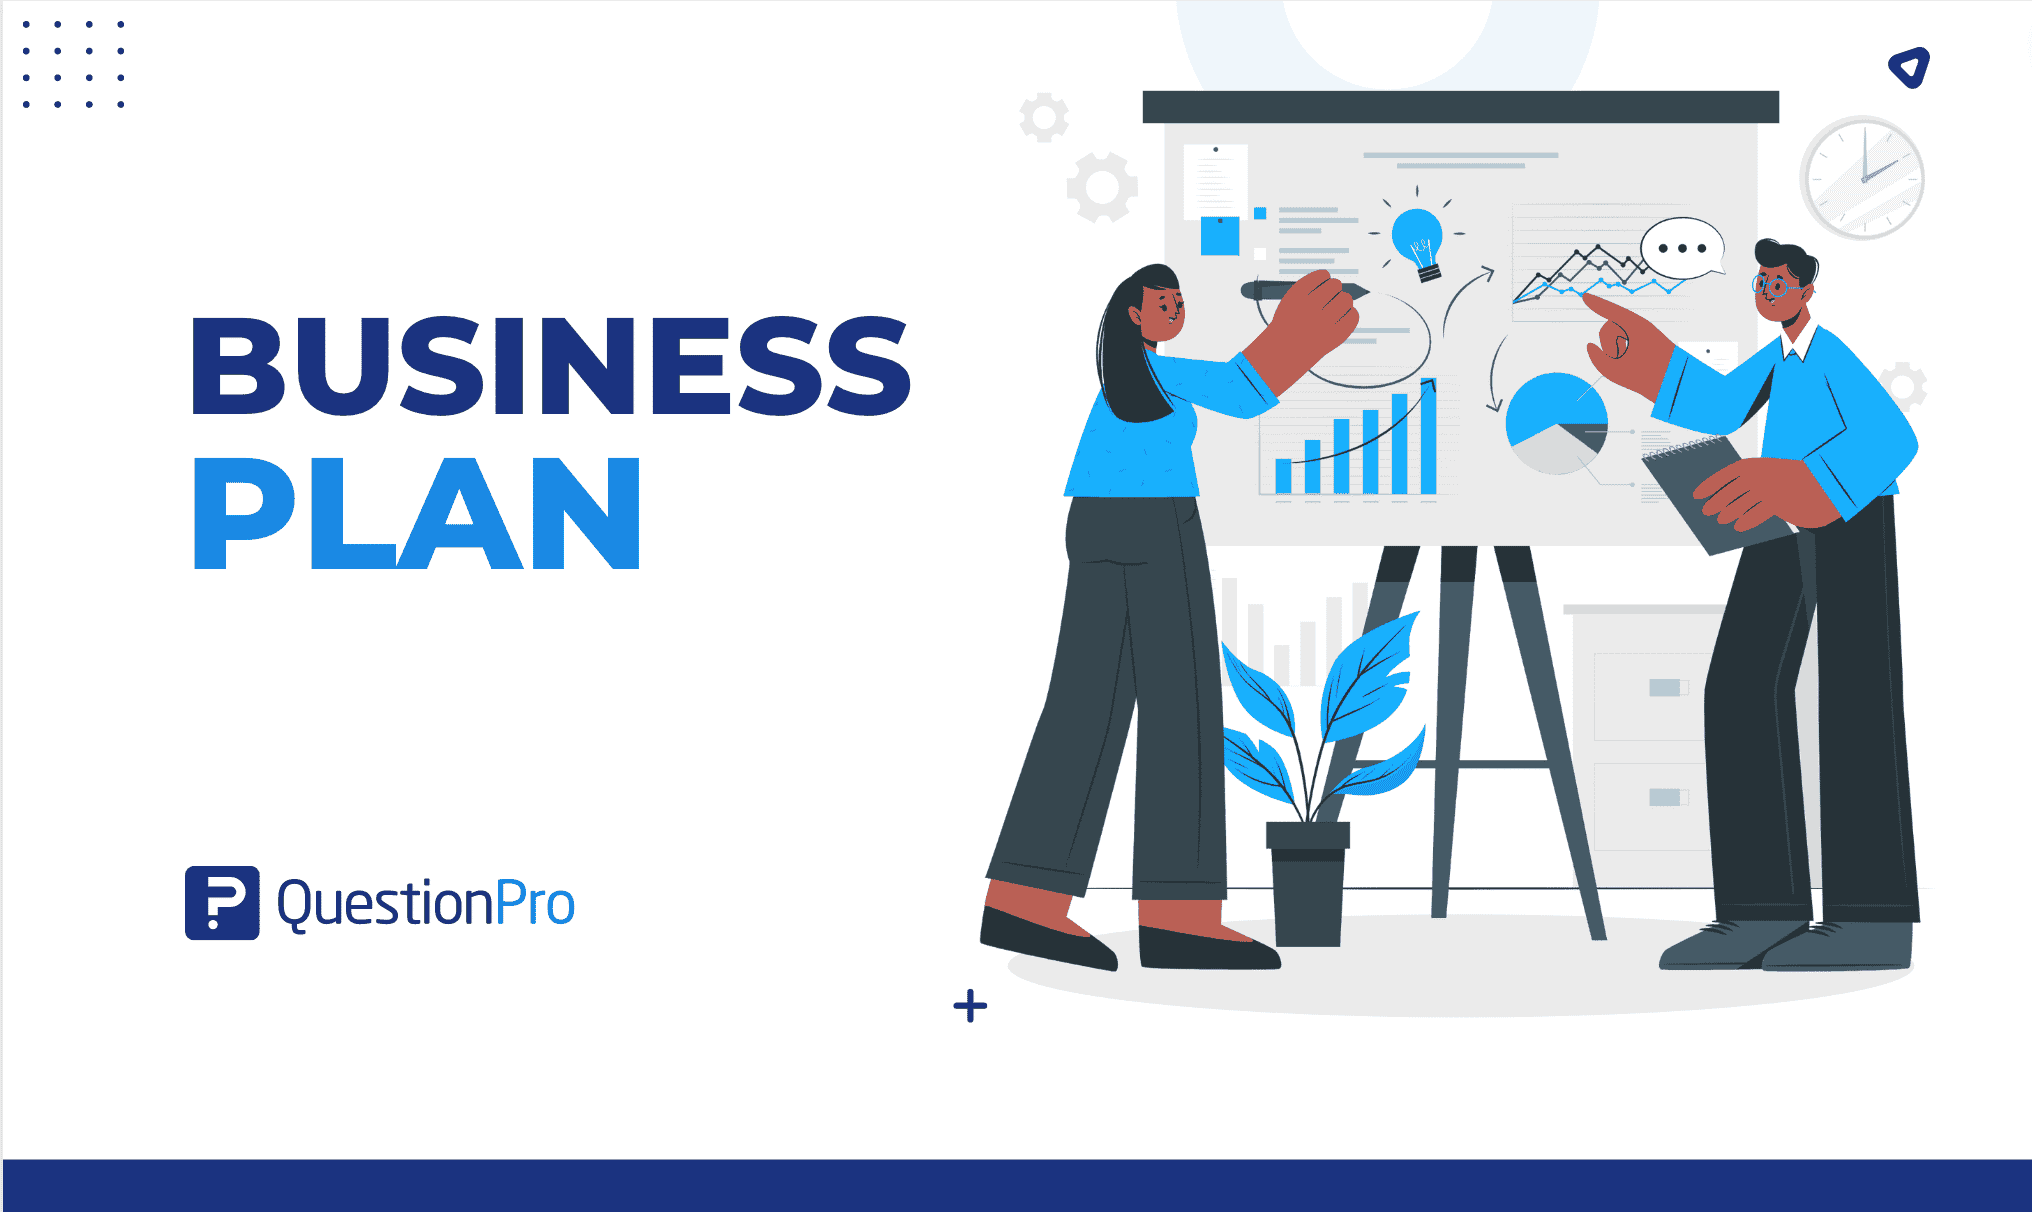 A business plan is the foundation for a business. You'll use your business plan as a guide for how to start, run, and grow your new business.